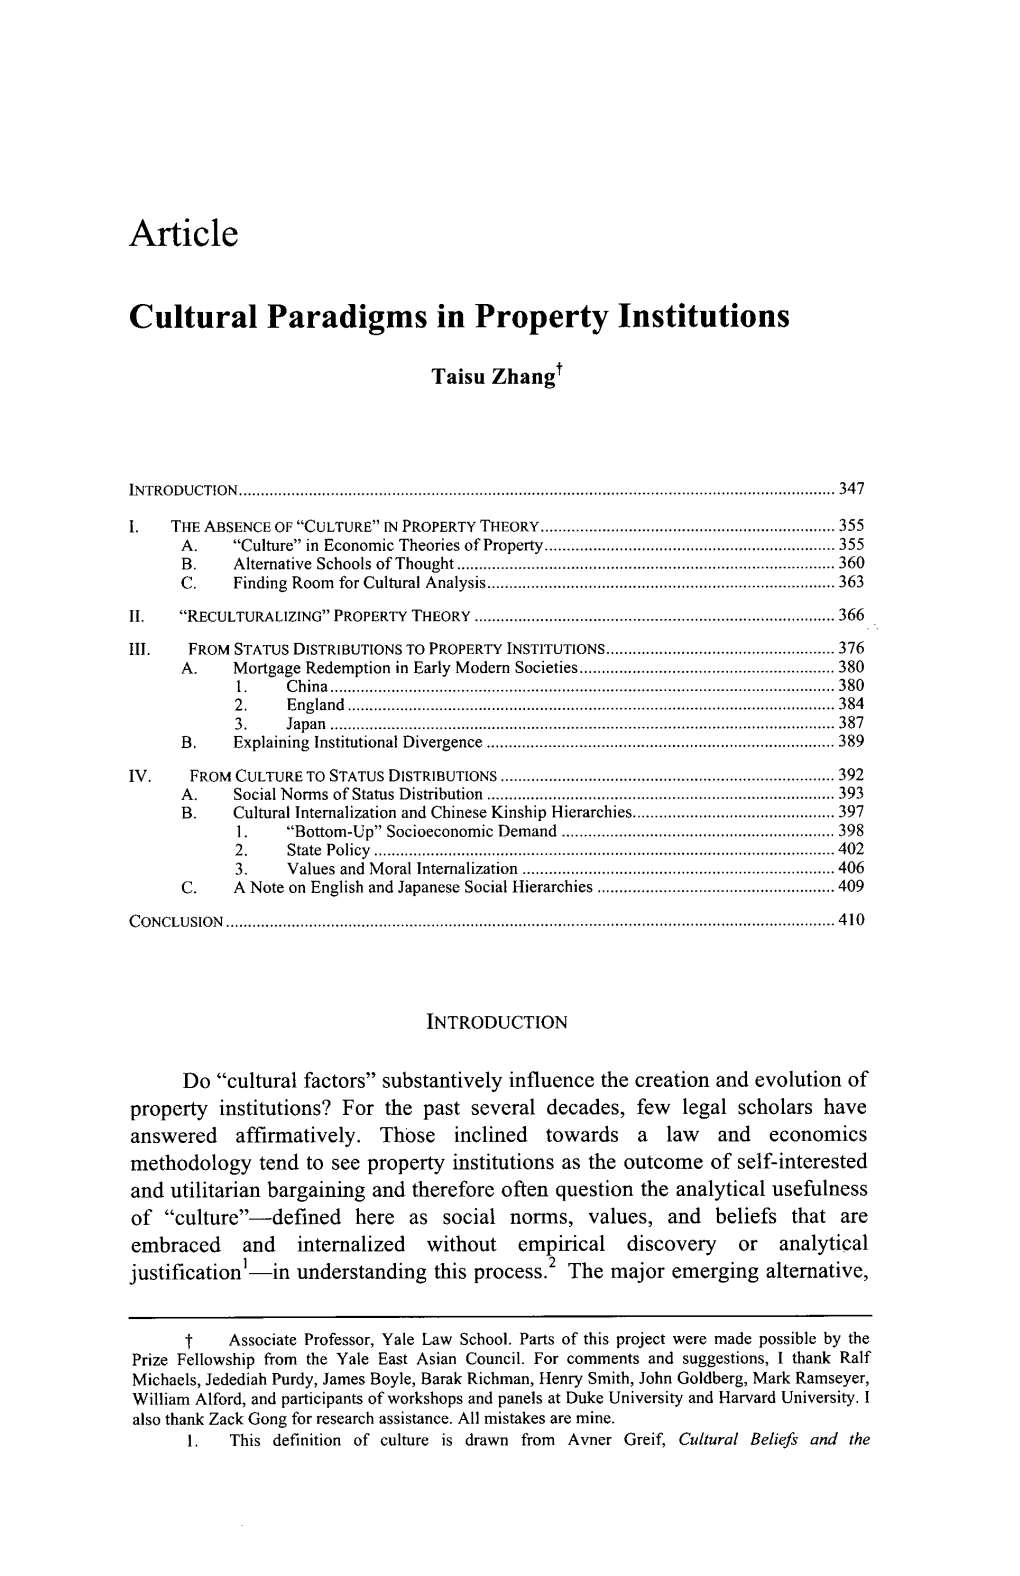 Cultural Paradigms in Property Institutions